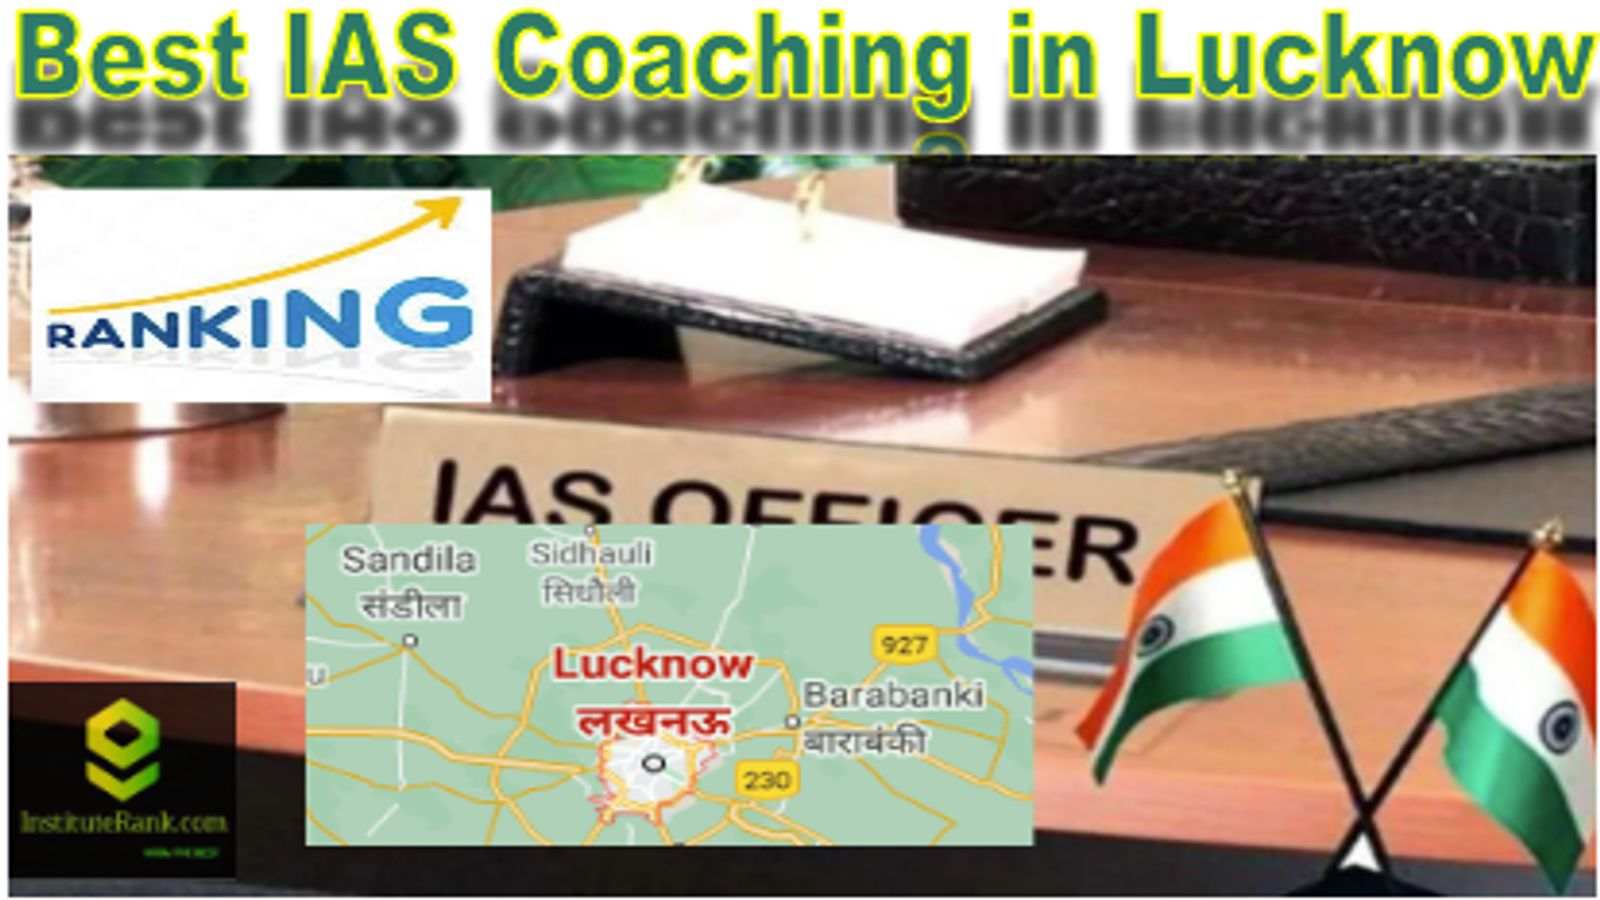 Best IAS Coaching in Lucknow Ranking 2022